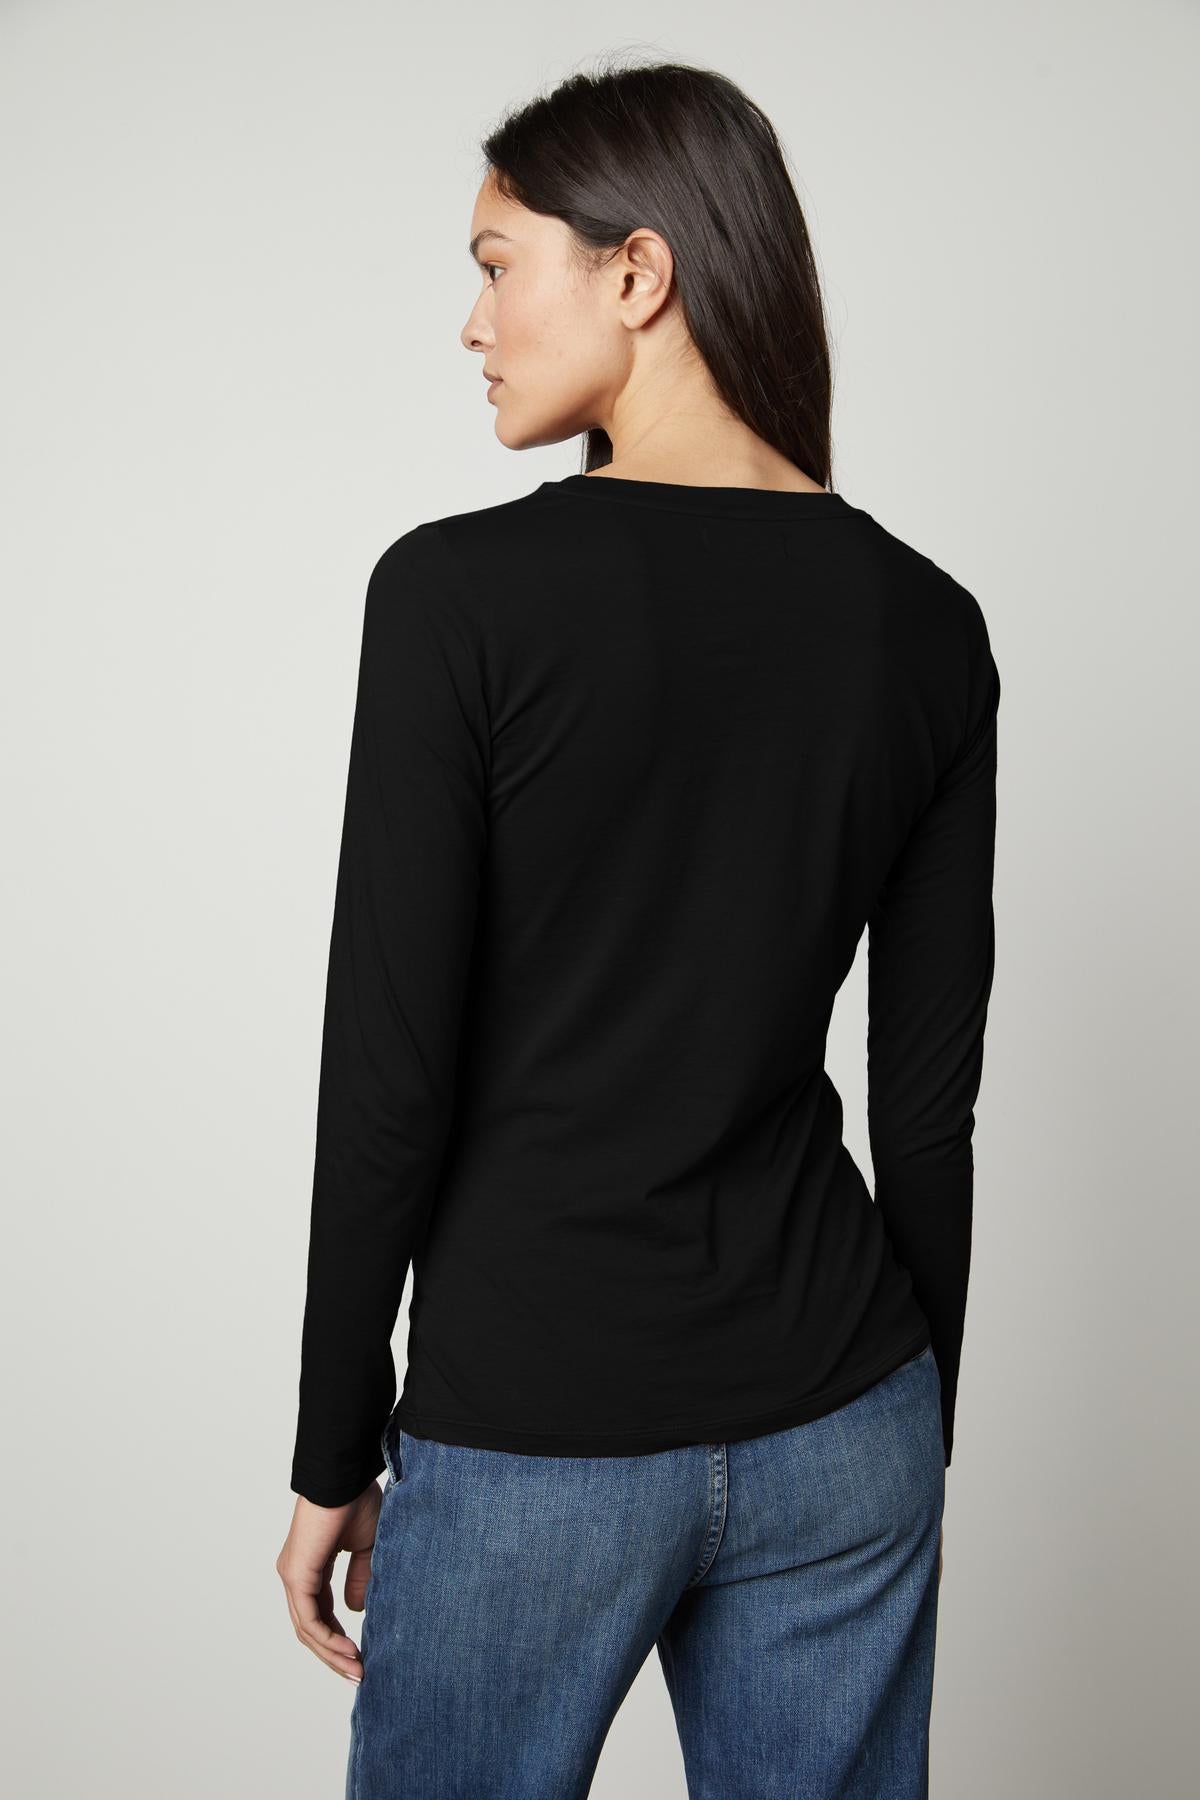 The back view of a woman wearing a Velvet by Graham & Spencer ZOFINA GAUZY WHISPER FITTED CREW NECK TEE.-35503491186881